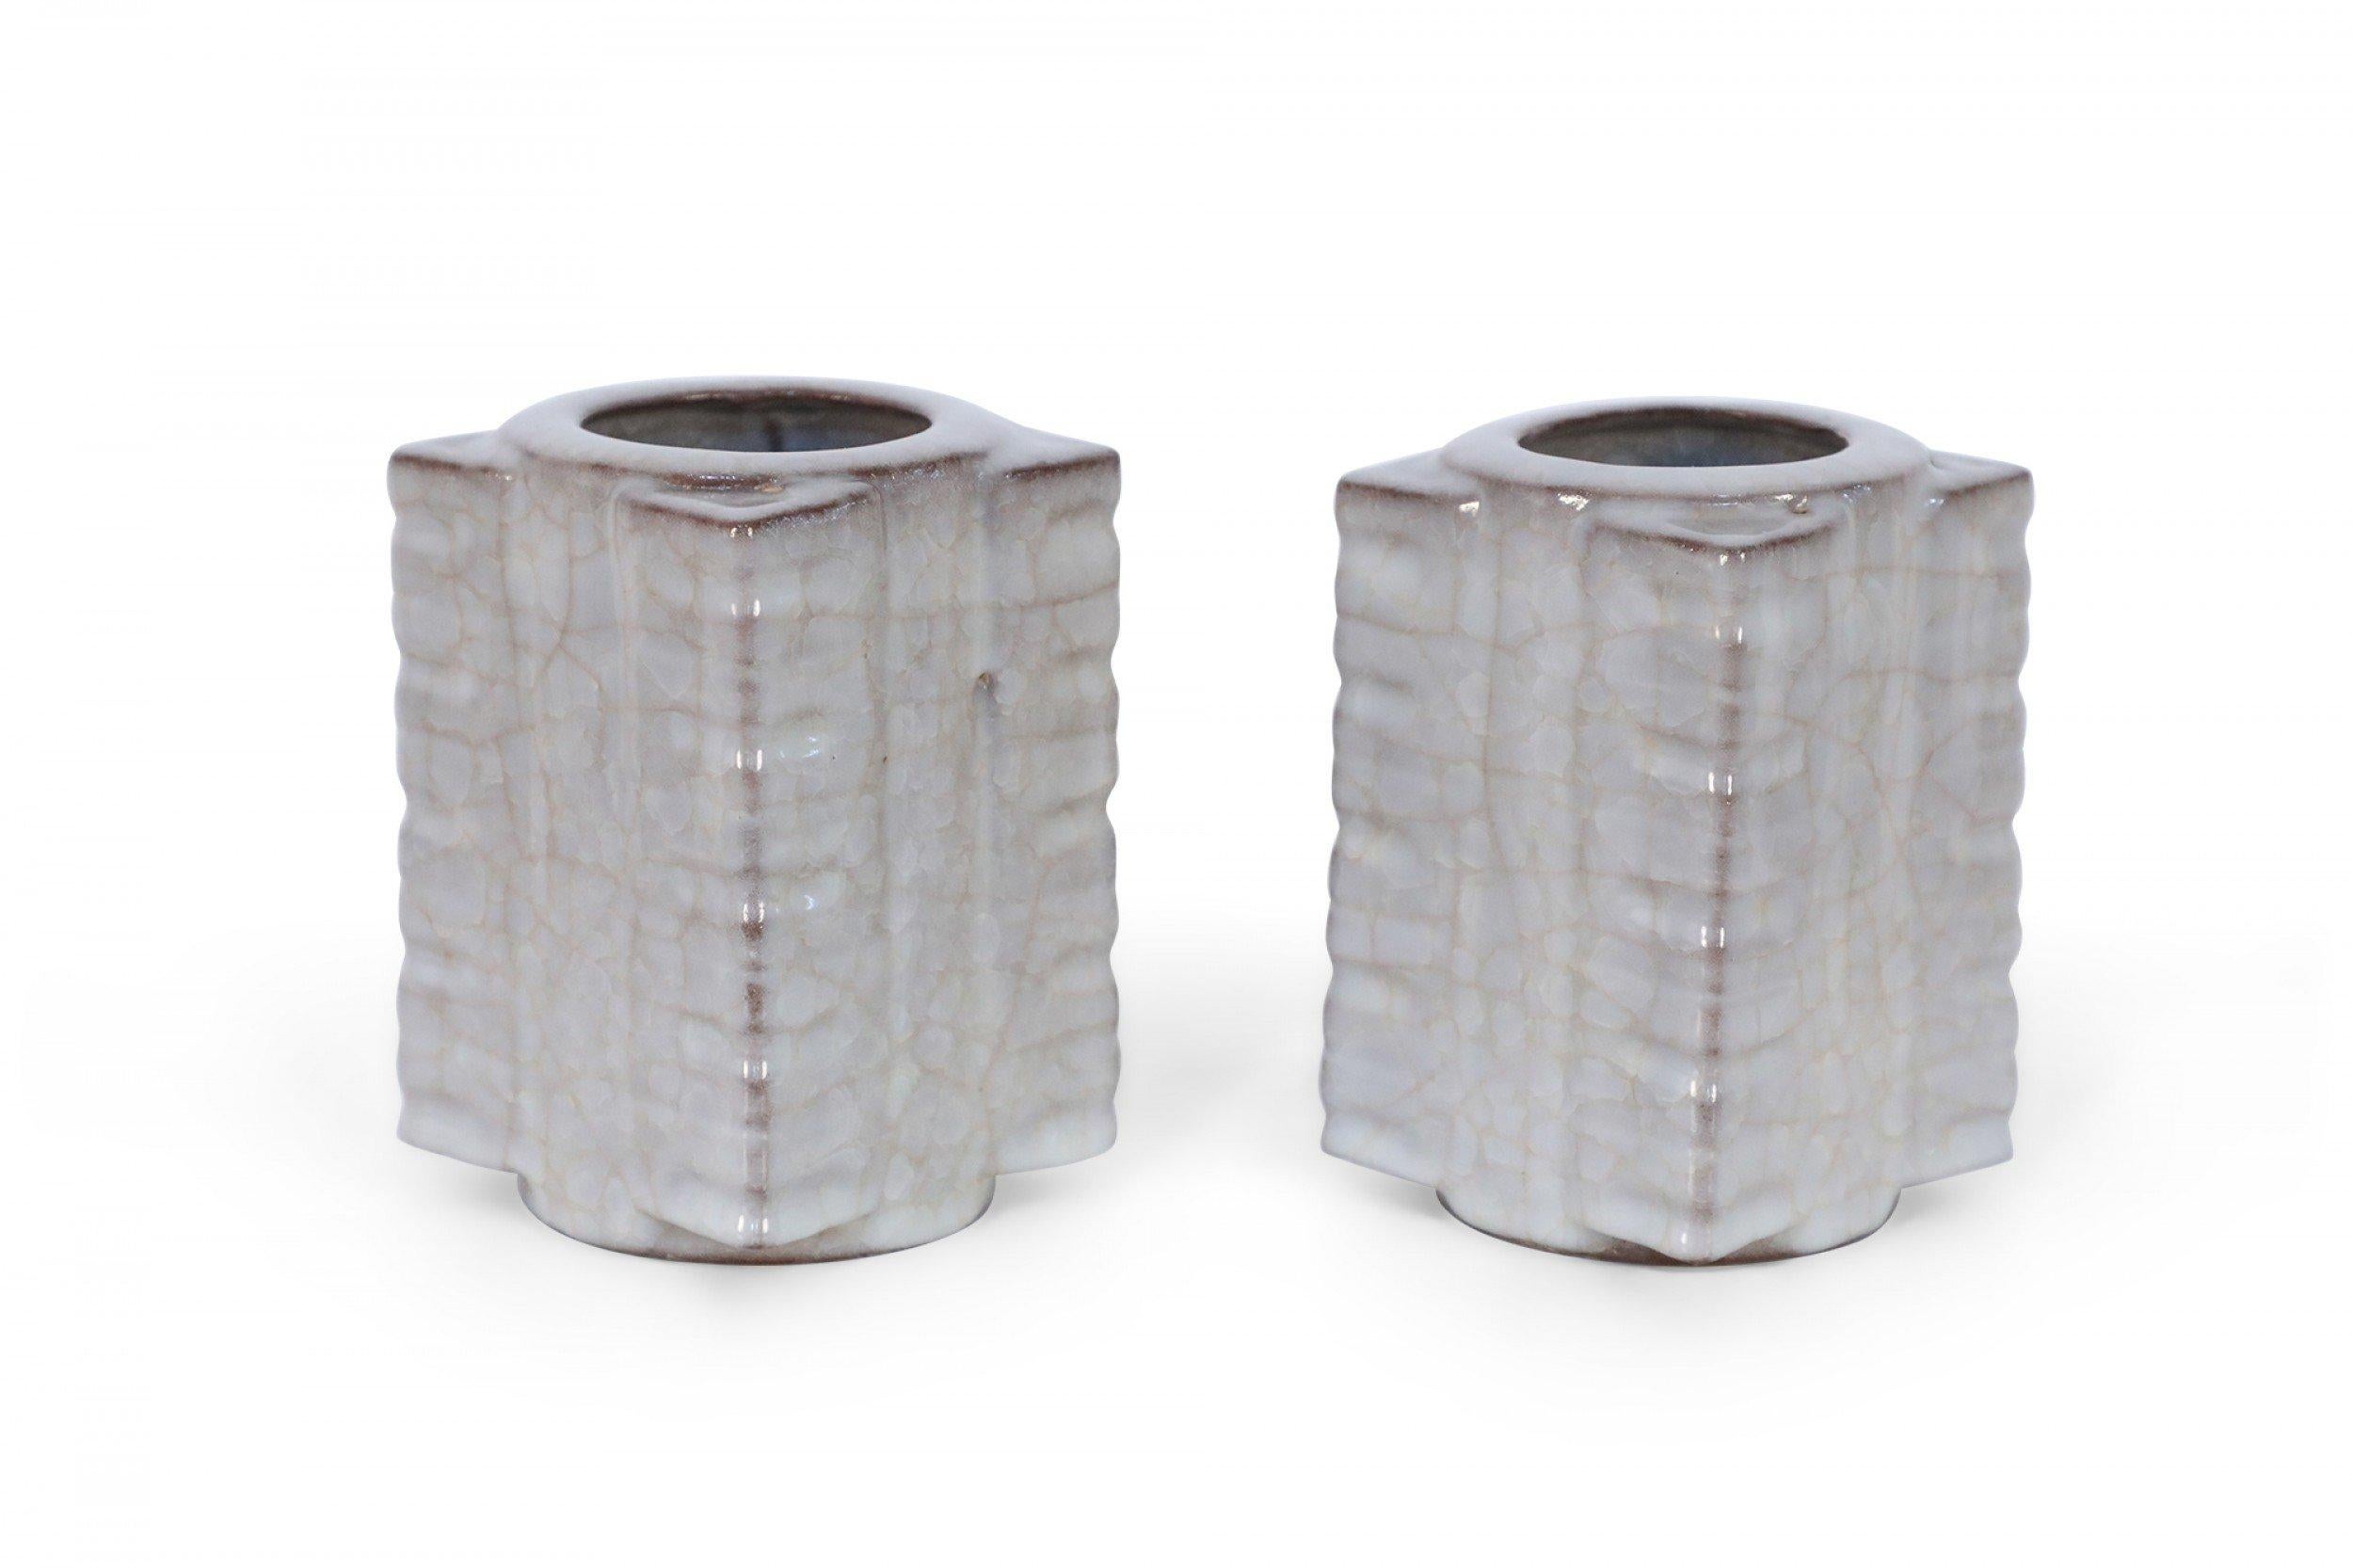 Pair of Antique Chinese Song Dynasty-style vases with traditional cong forms, beige crackle finishes, and round mouths and bases (PRICED AS PAIR).
 